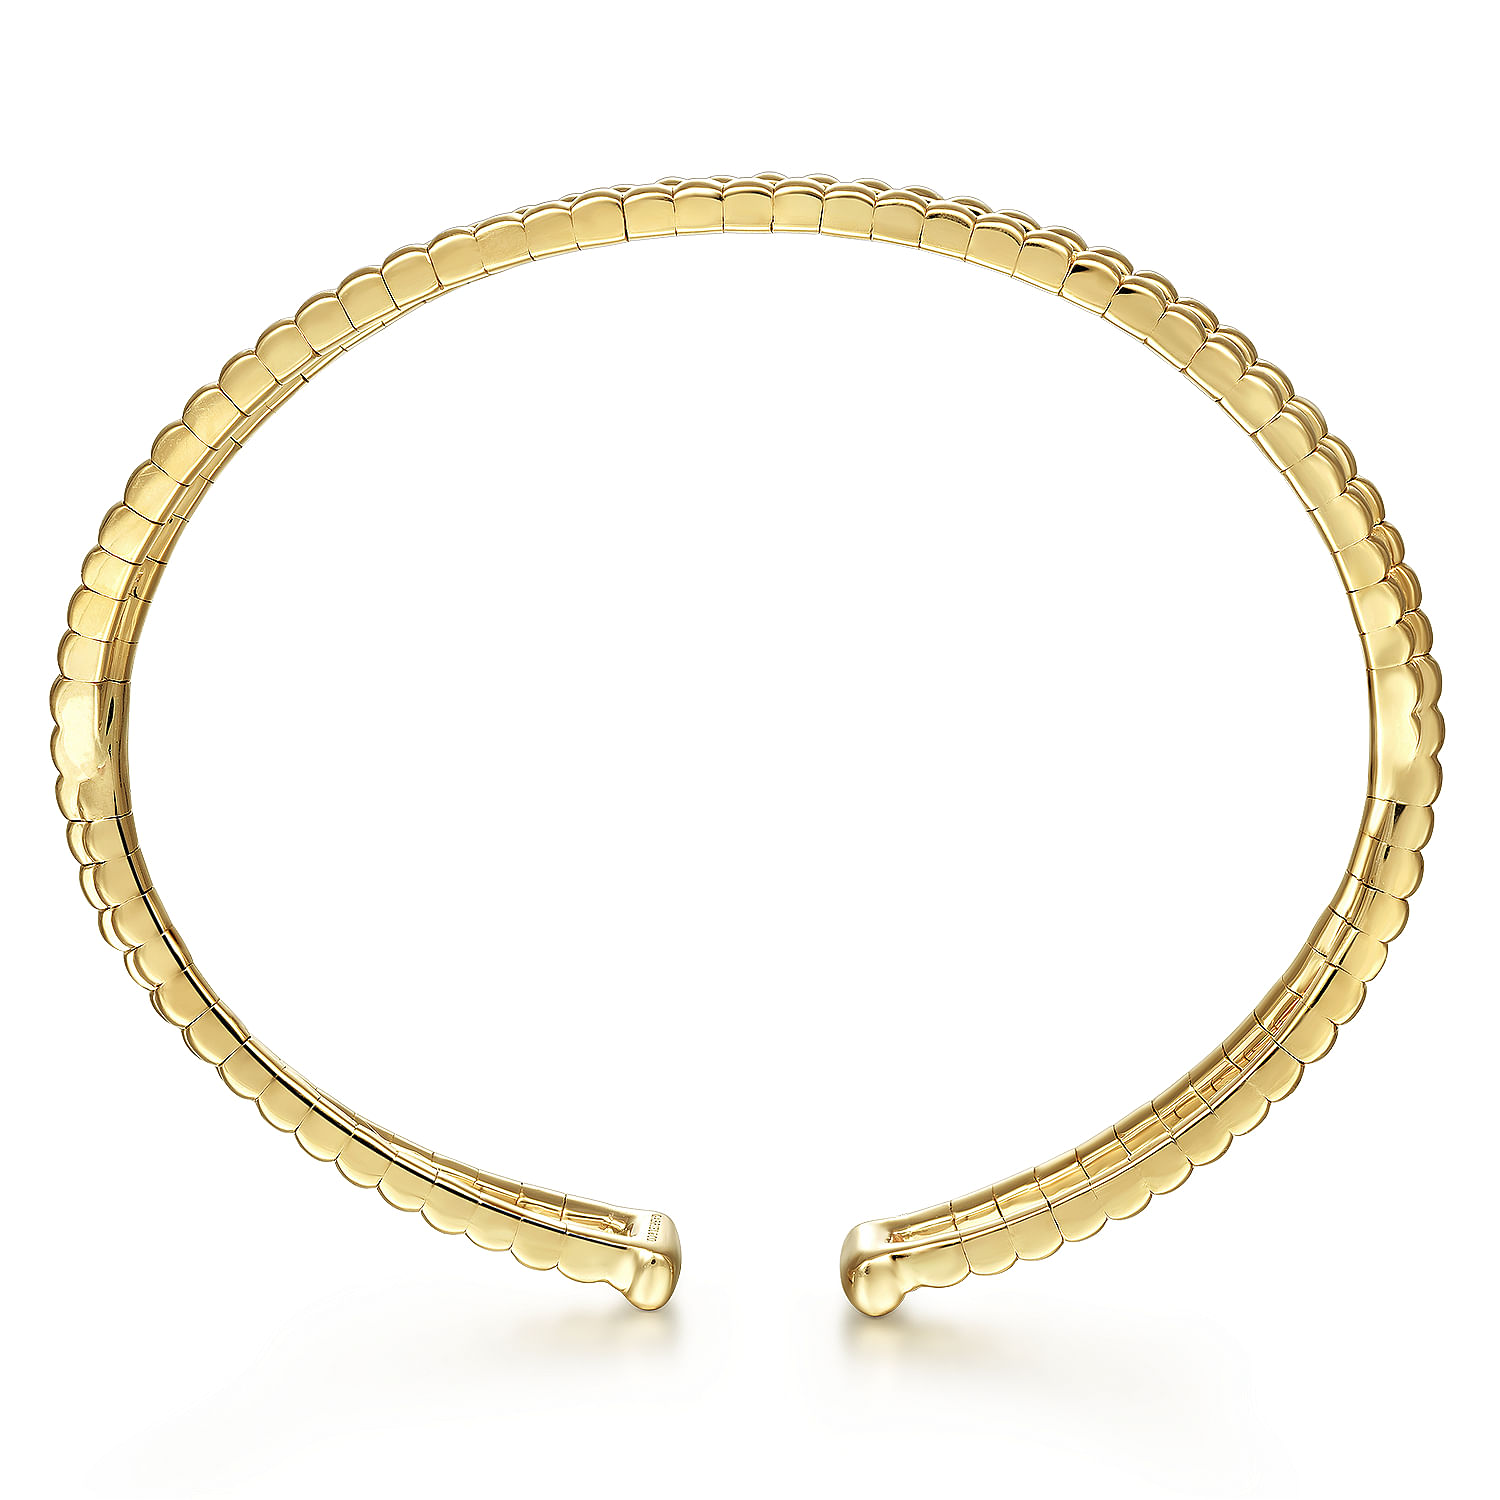 14K Yellow Gold Open Double Row Textured Bangle